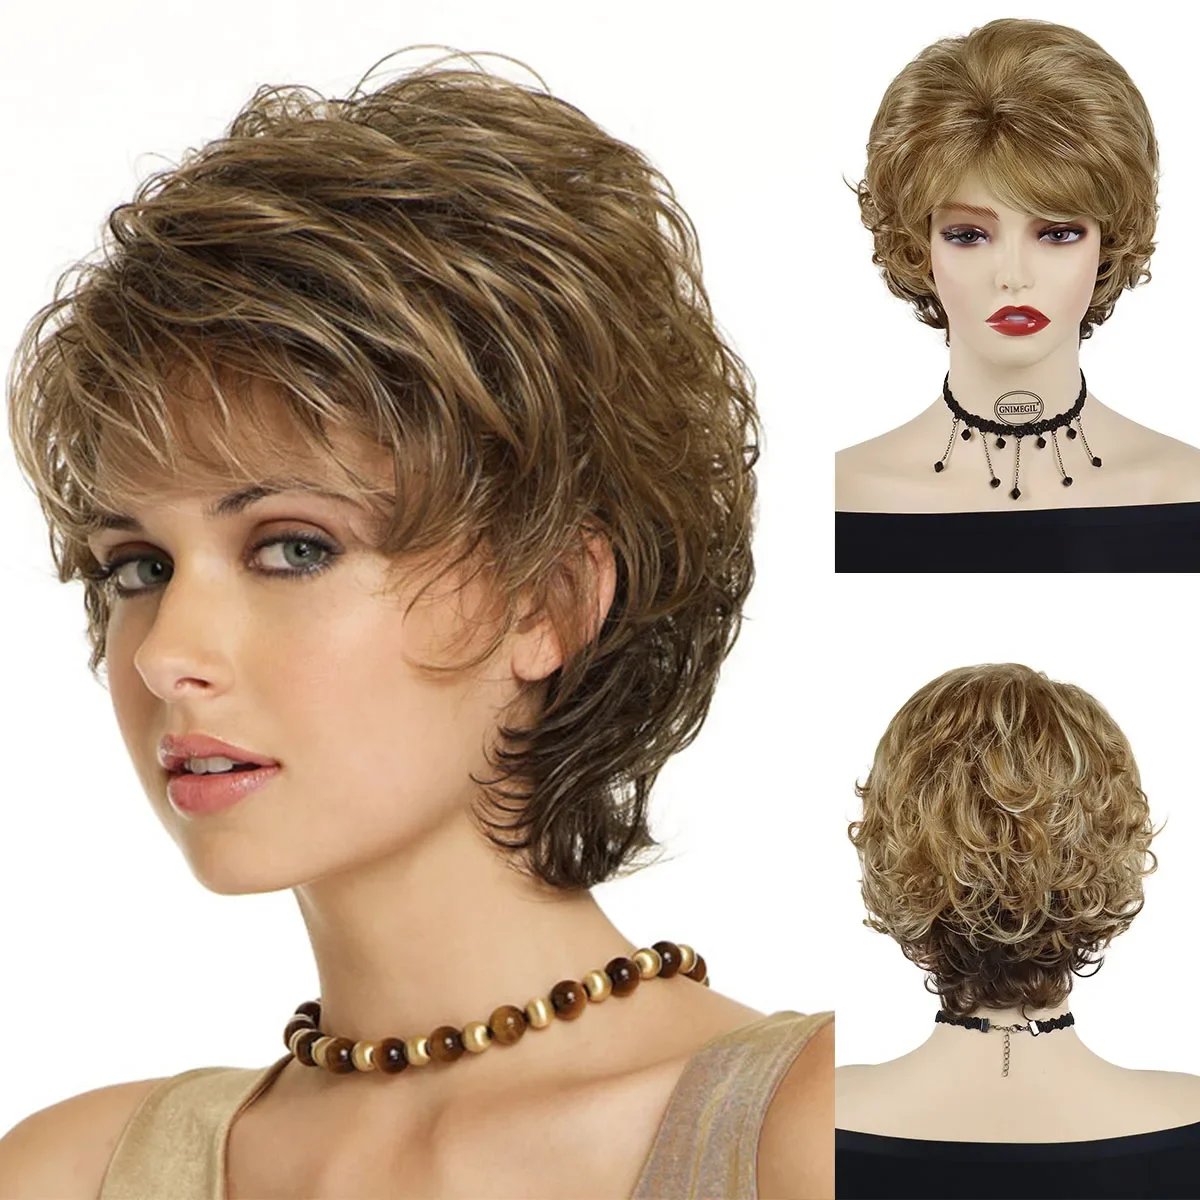 

GNIMEGIL Synthetic Short Wigs for White Women Sandy Blonde Wig with Bangs Mix Brown Color Curly Wig Hair Ombre Elderly Wig Mom